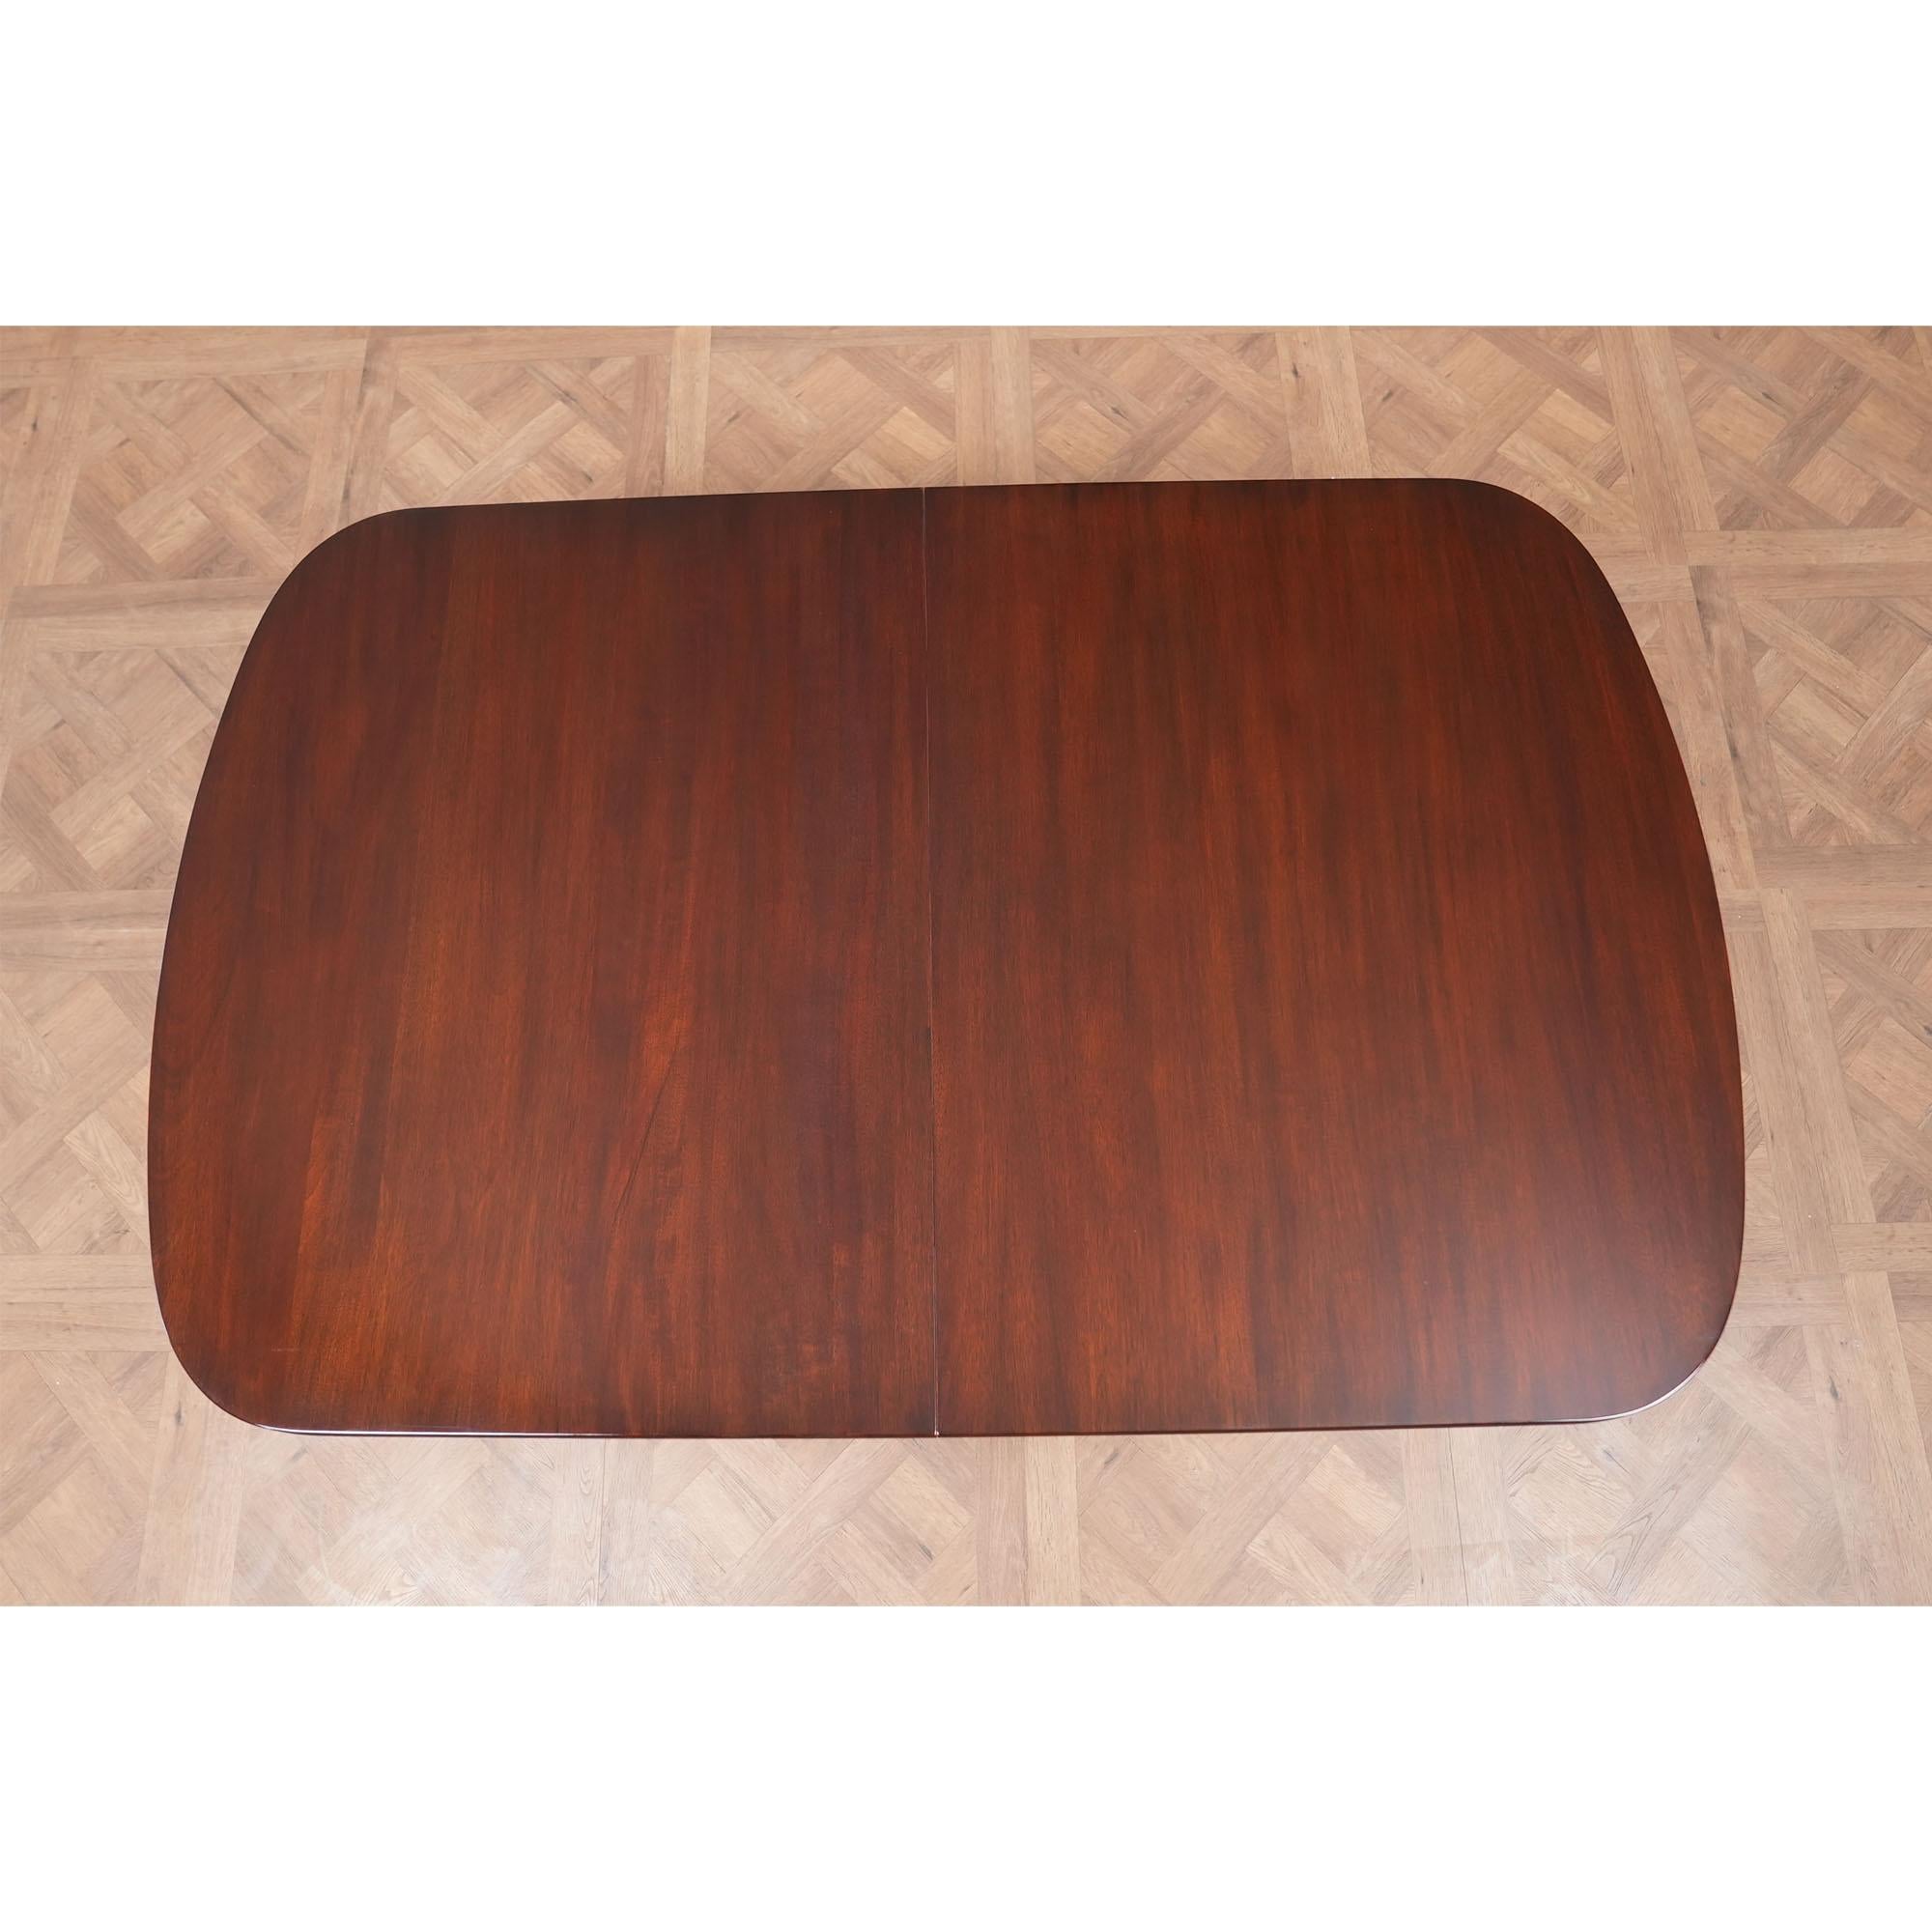 A Vintage Henkel Harris Dining Table brought to you by Niagara Furniture. This table is impressive in both it’s design and scale. Made of beautifully grained solid mahogany, the Vintage Henkel Harris Dining Table has three extra leaves to extend the